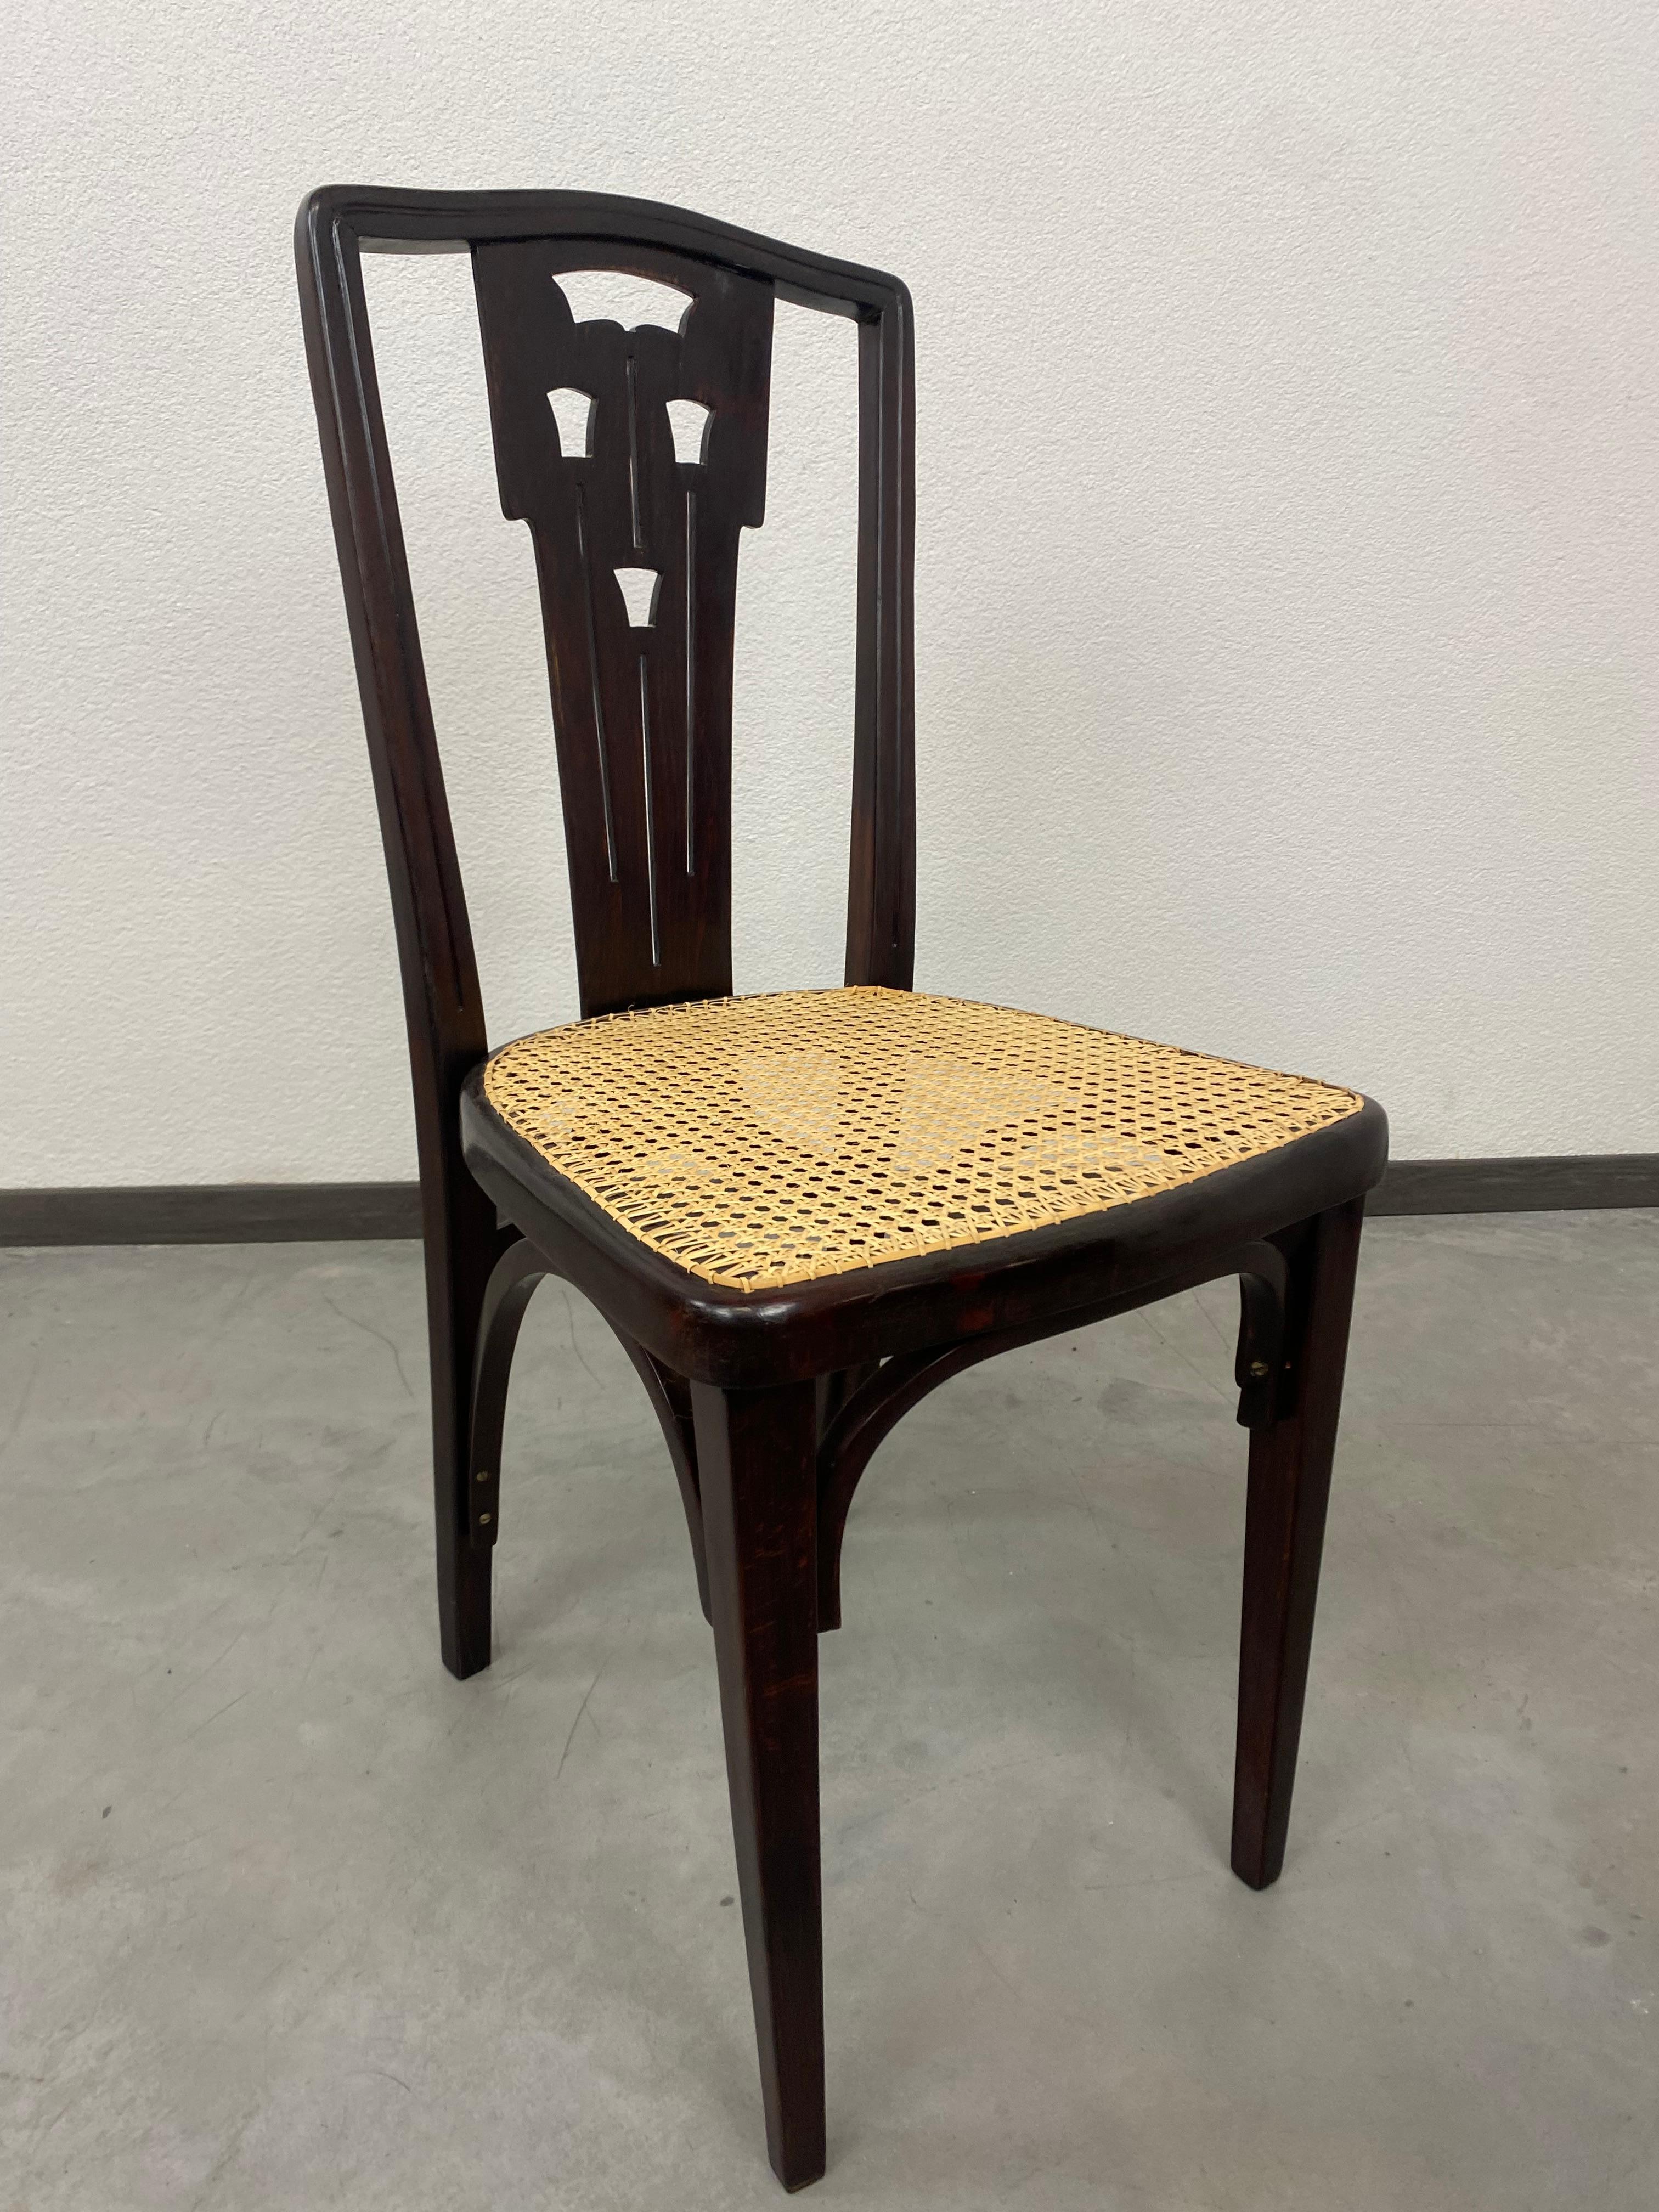 Thonet dining chair no.732 tulip variant. professionally stained and repolished with new handmade rattan seat.